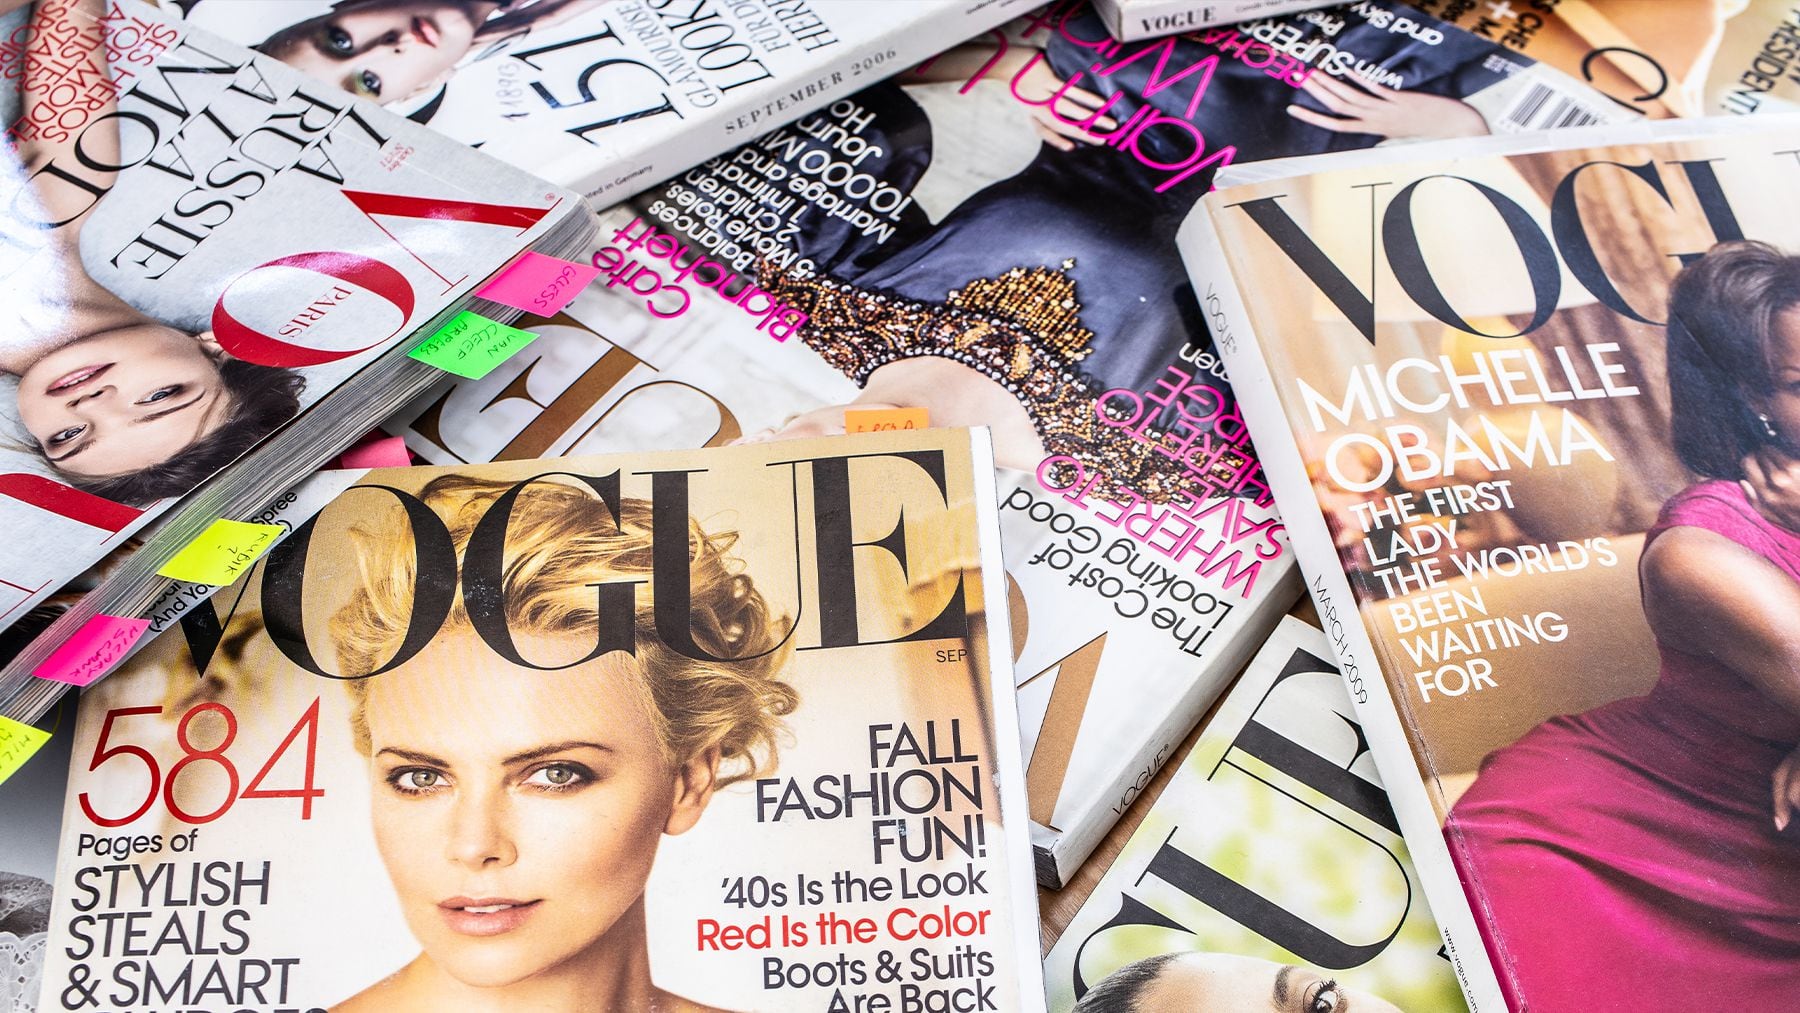 Vogue Appoints Raul Martinez as Global Creative Director